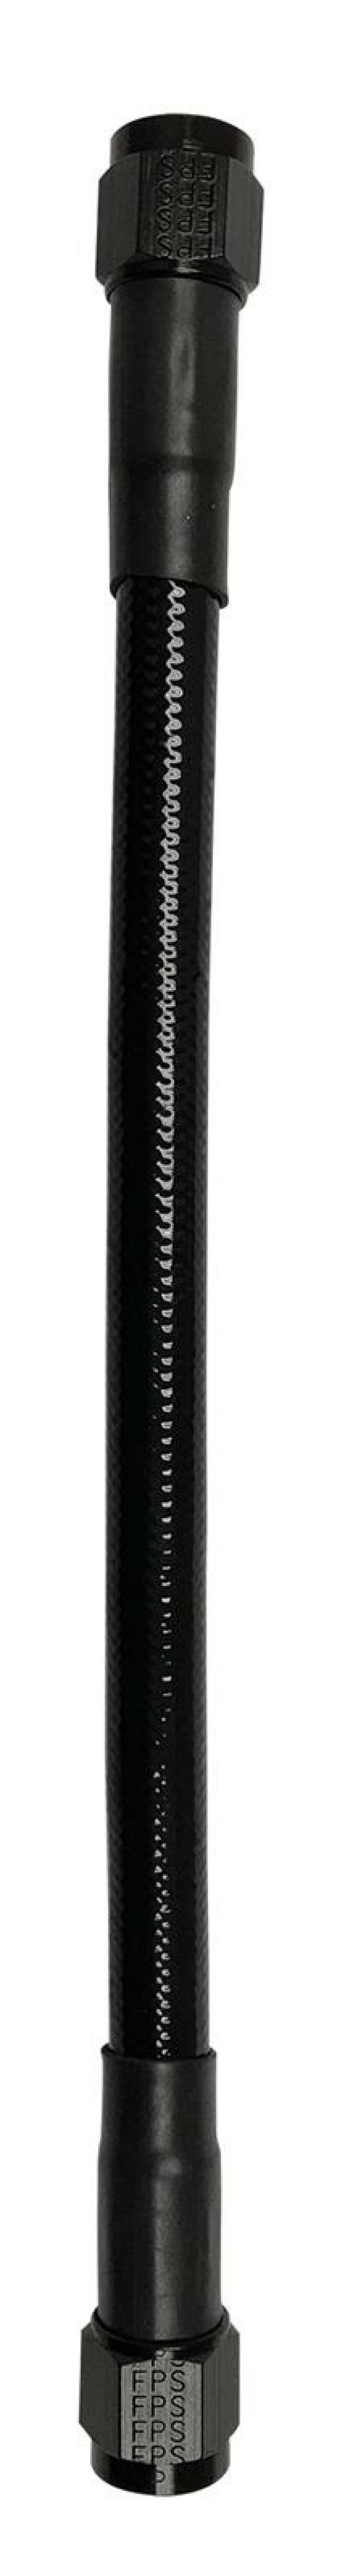 Fragola -10AN Ext Black PTFE Hose Assembly Straight x Straight 72in - 6029-1-1-72BL